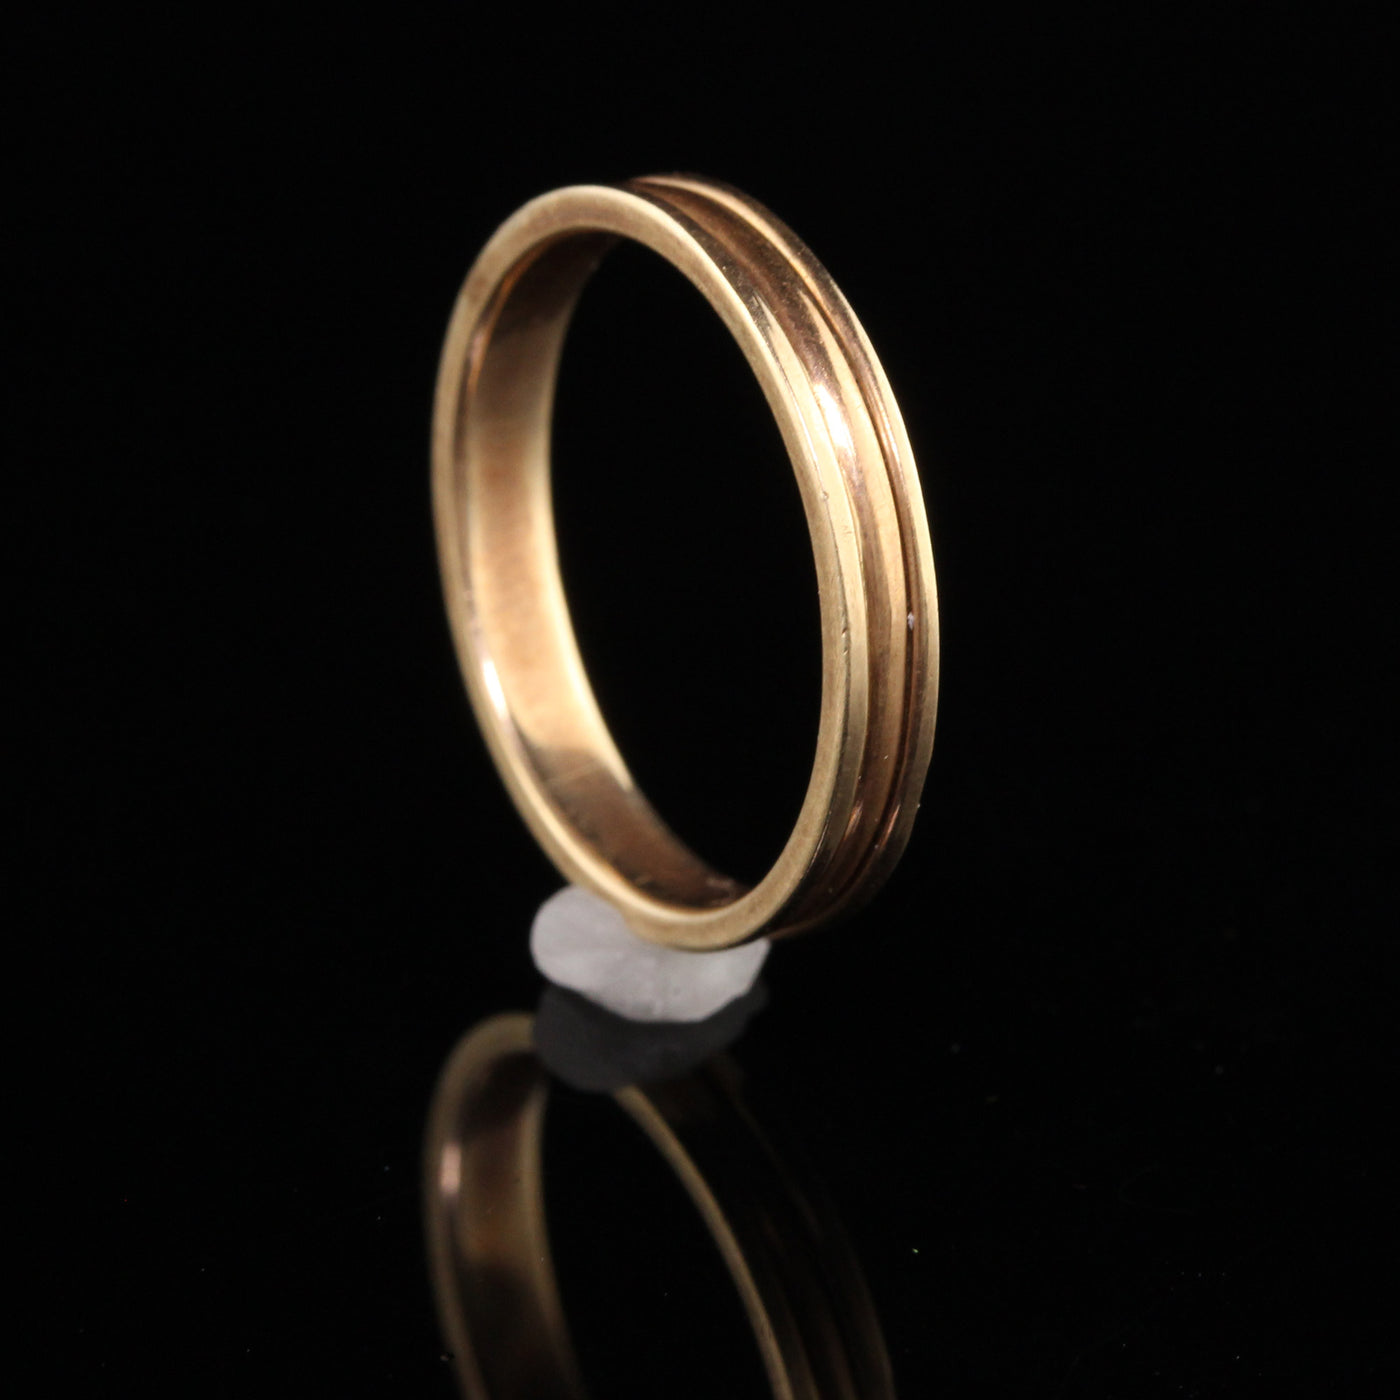 RESERVED - Layaway 5 of 5 - Antique Victorian 14K Yellow Gold Engraved Wedding Band - Size 6